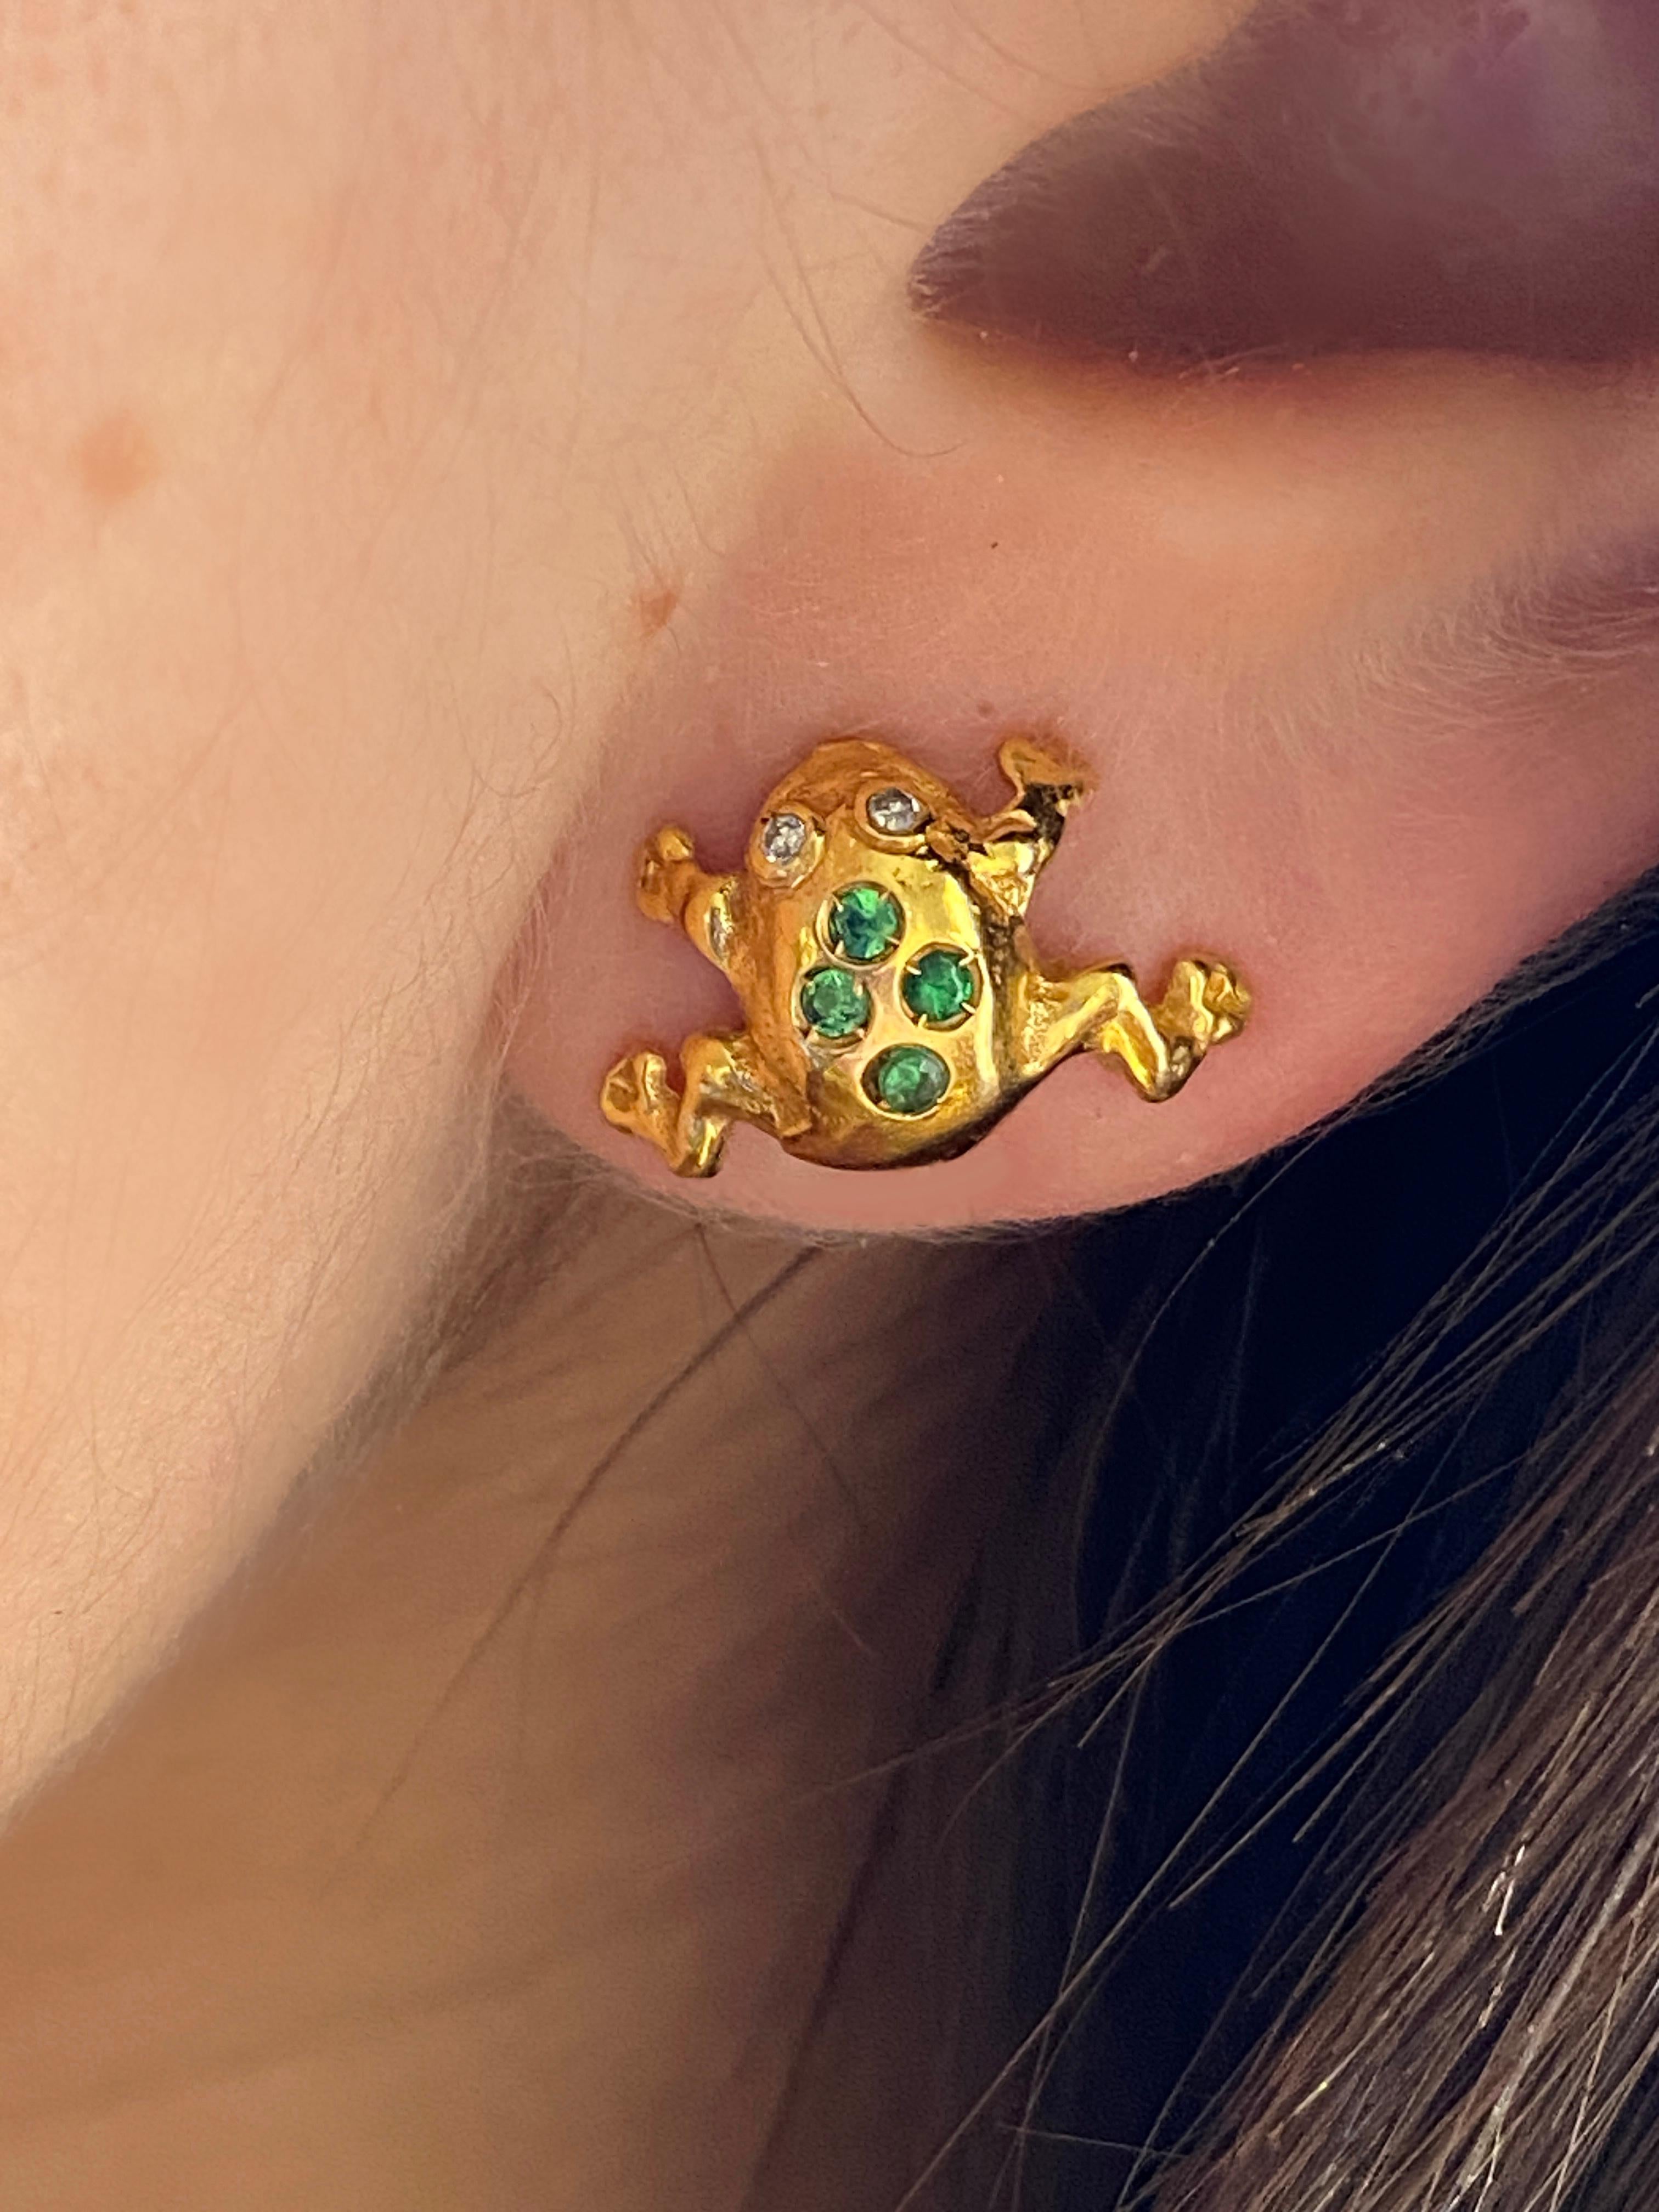 These 18K Yellow Gold stud earrings are uniquely designed in the shape of adorable frogs with Diamonds eyes and adorned with stunning Emeralds.
Handcrafted in Italy by Rossella Ugolini, these earrings makes a perfect gift for a Mother's Day .
The